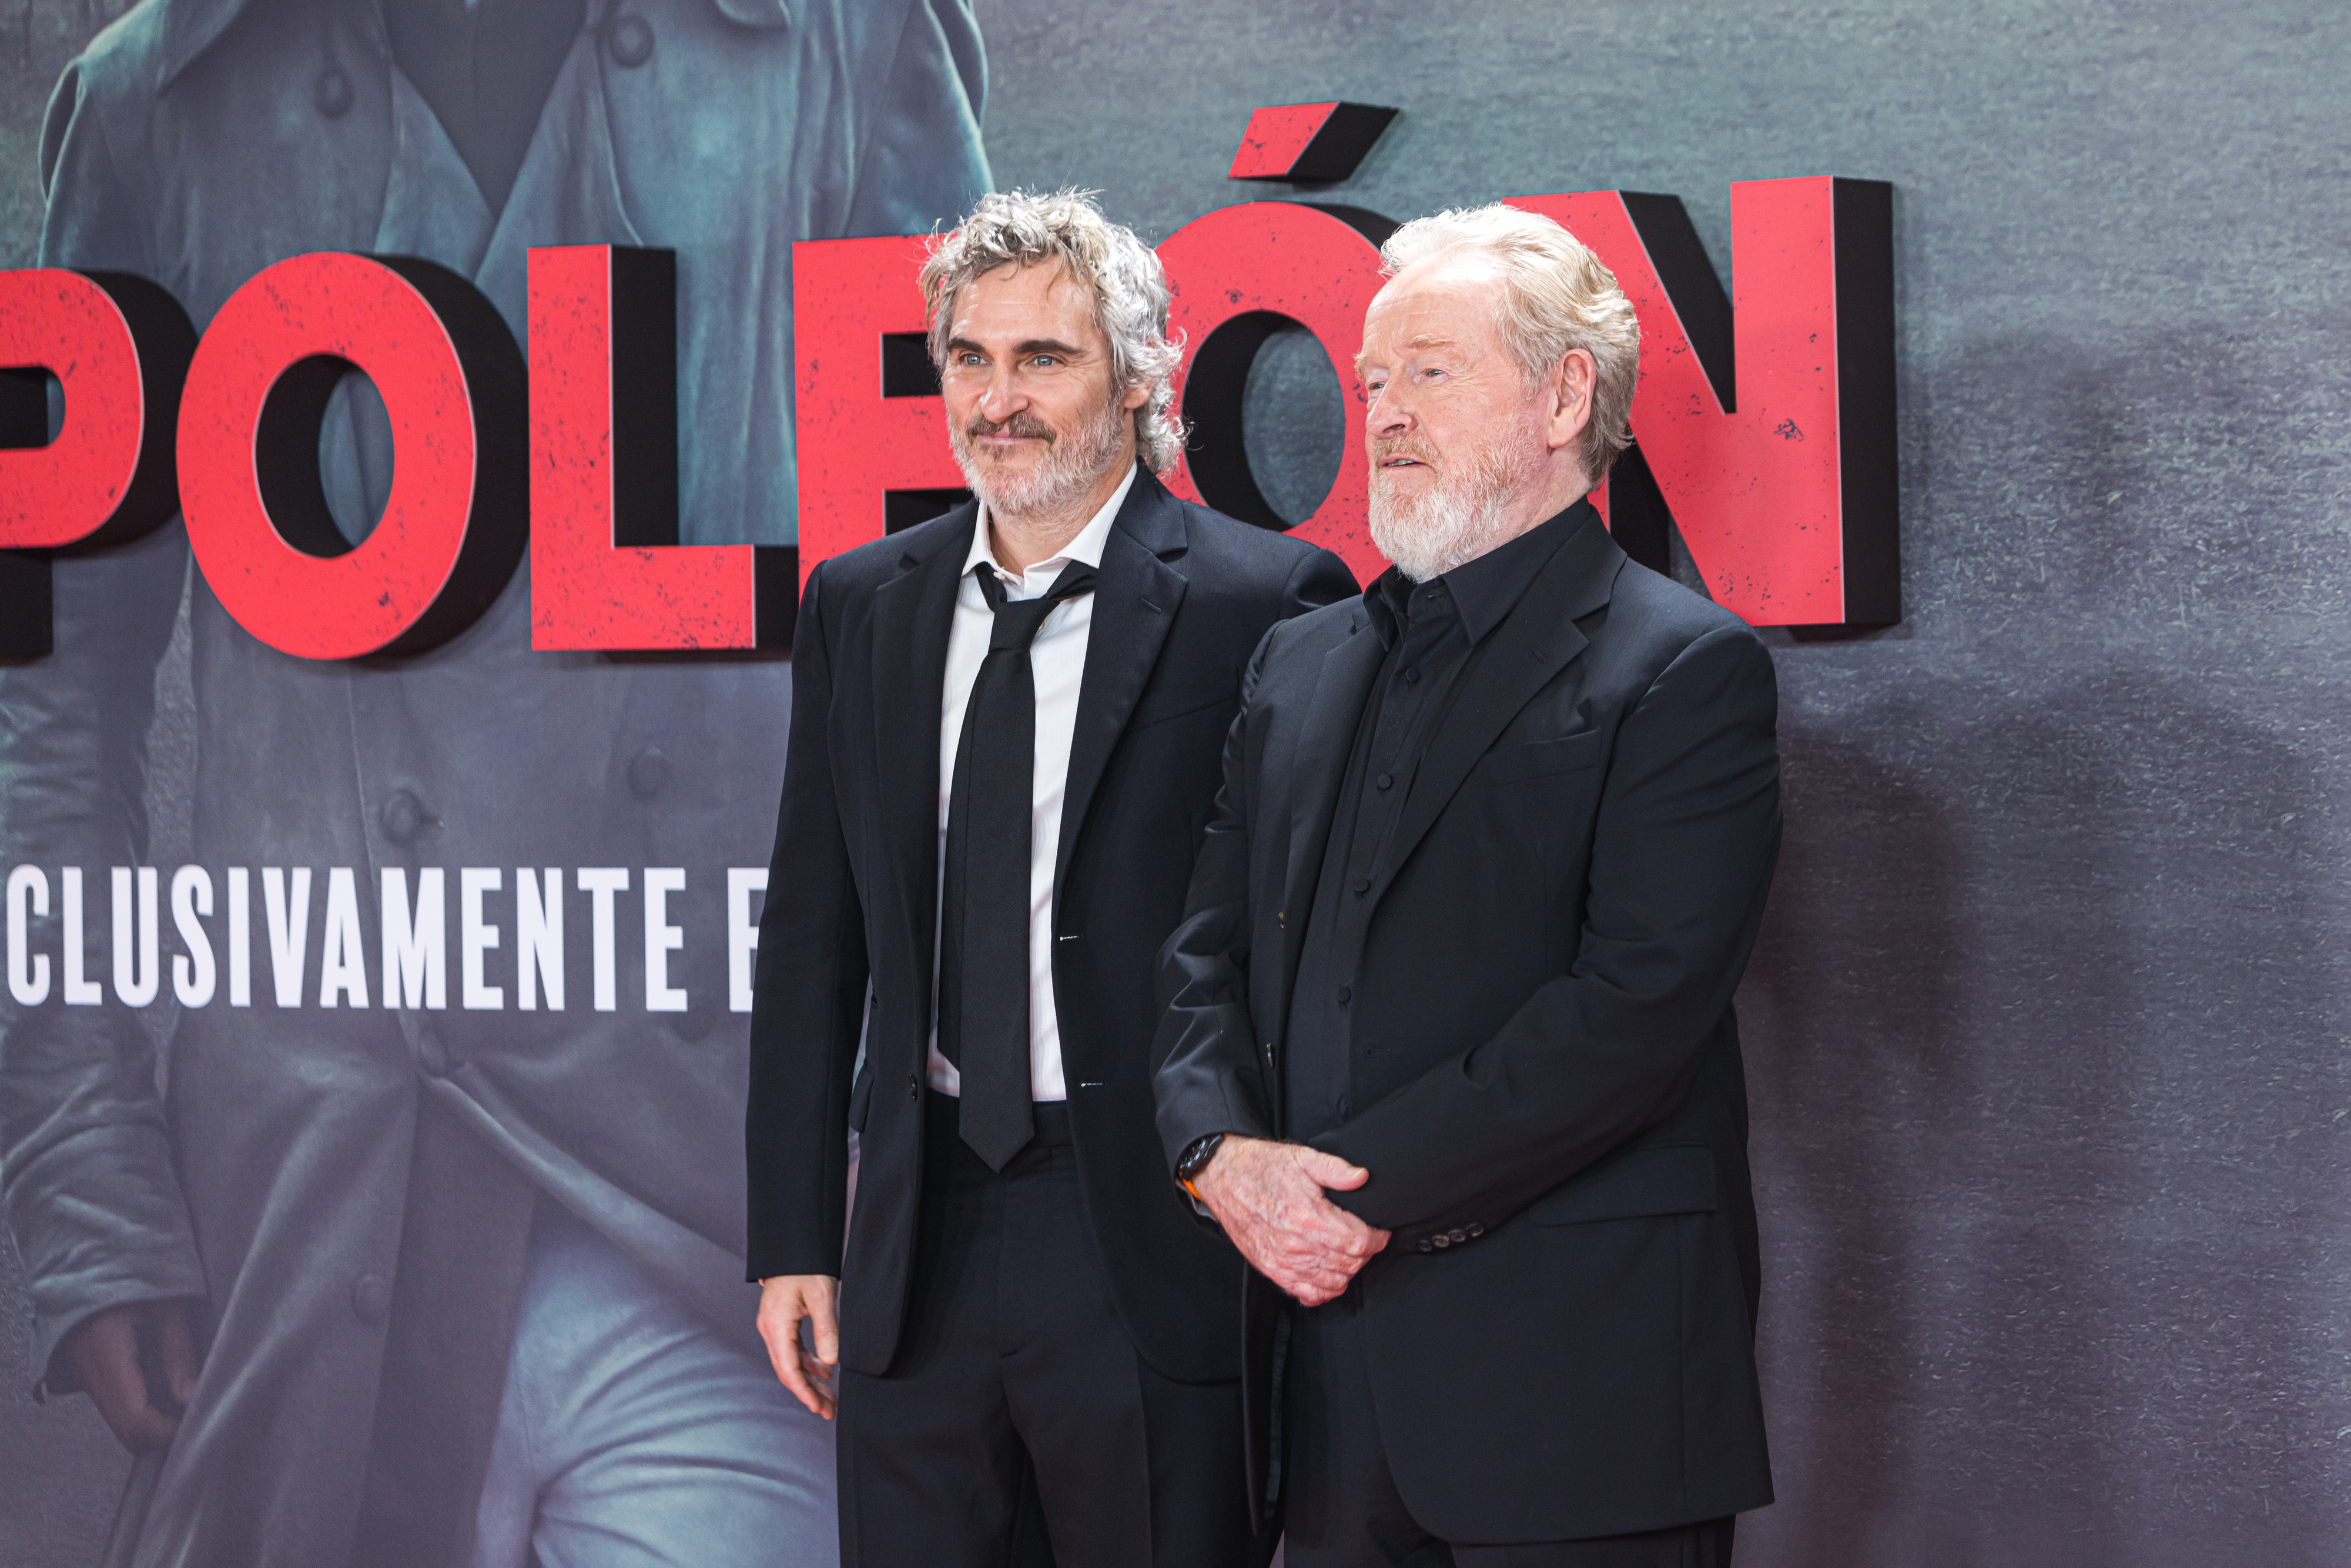 Joaquin Phoenix and Ridley Scott on the red carpet